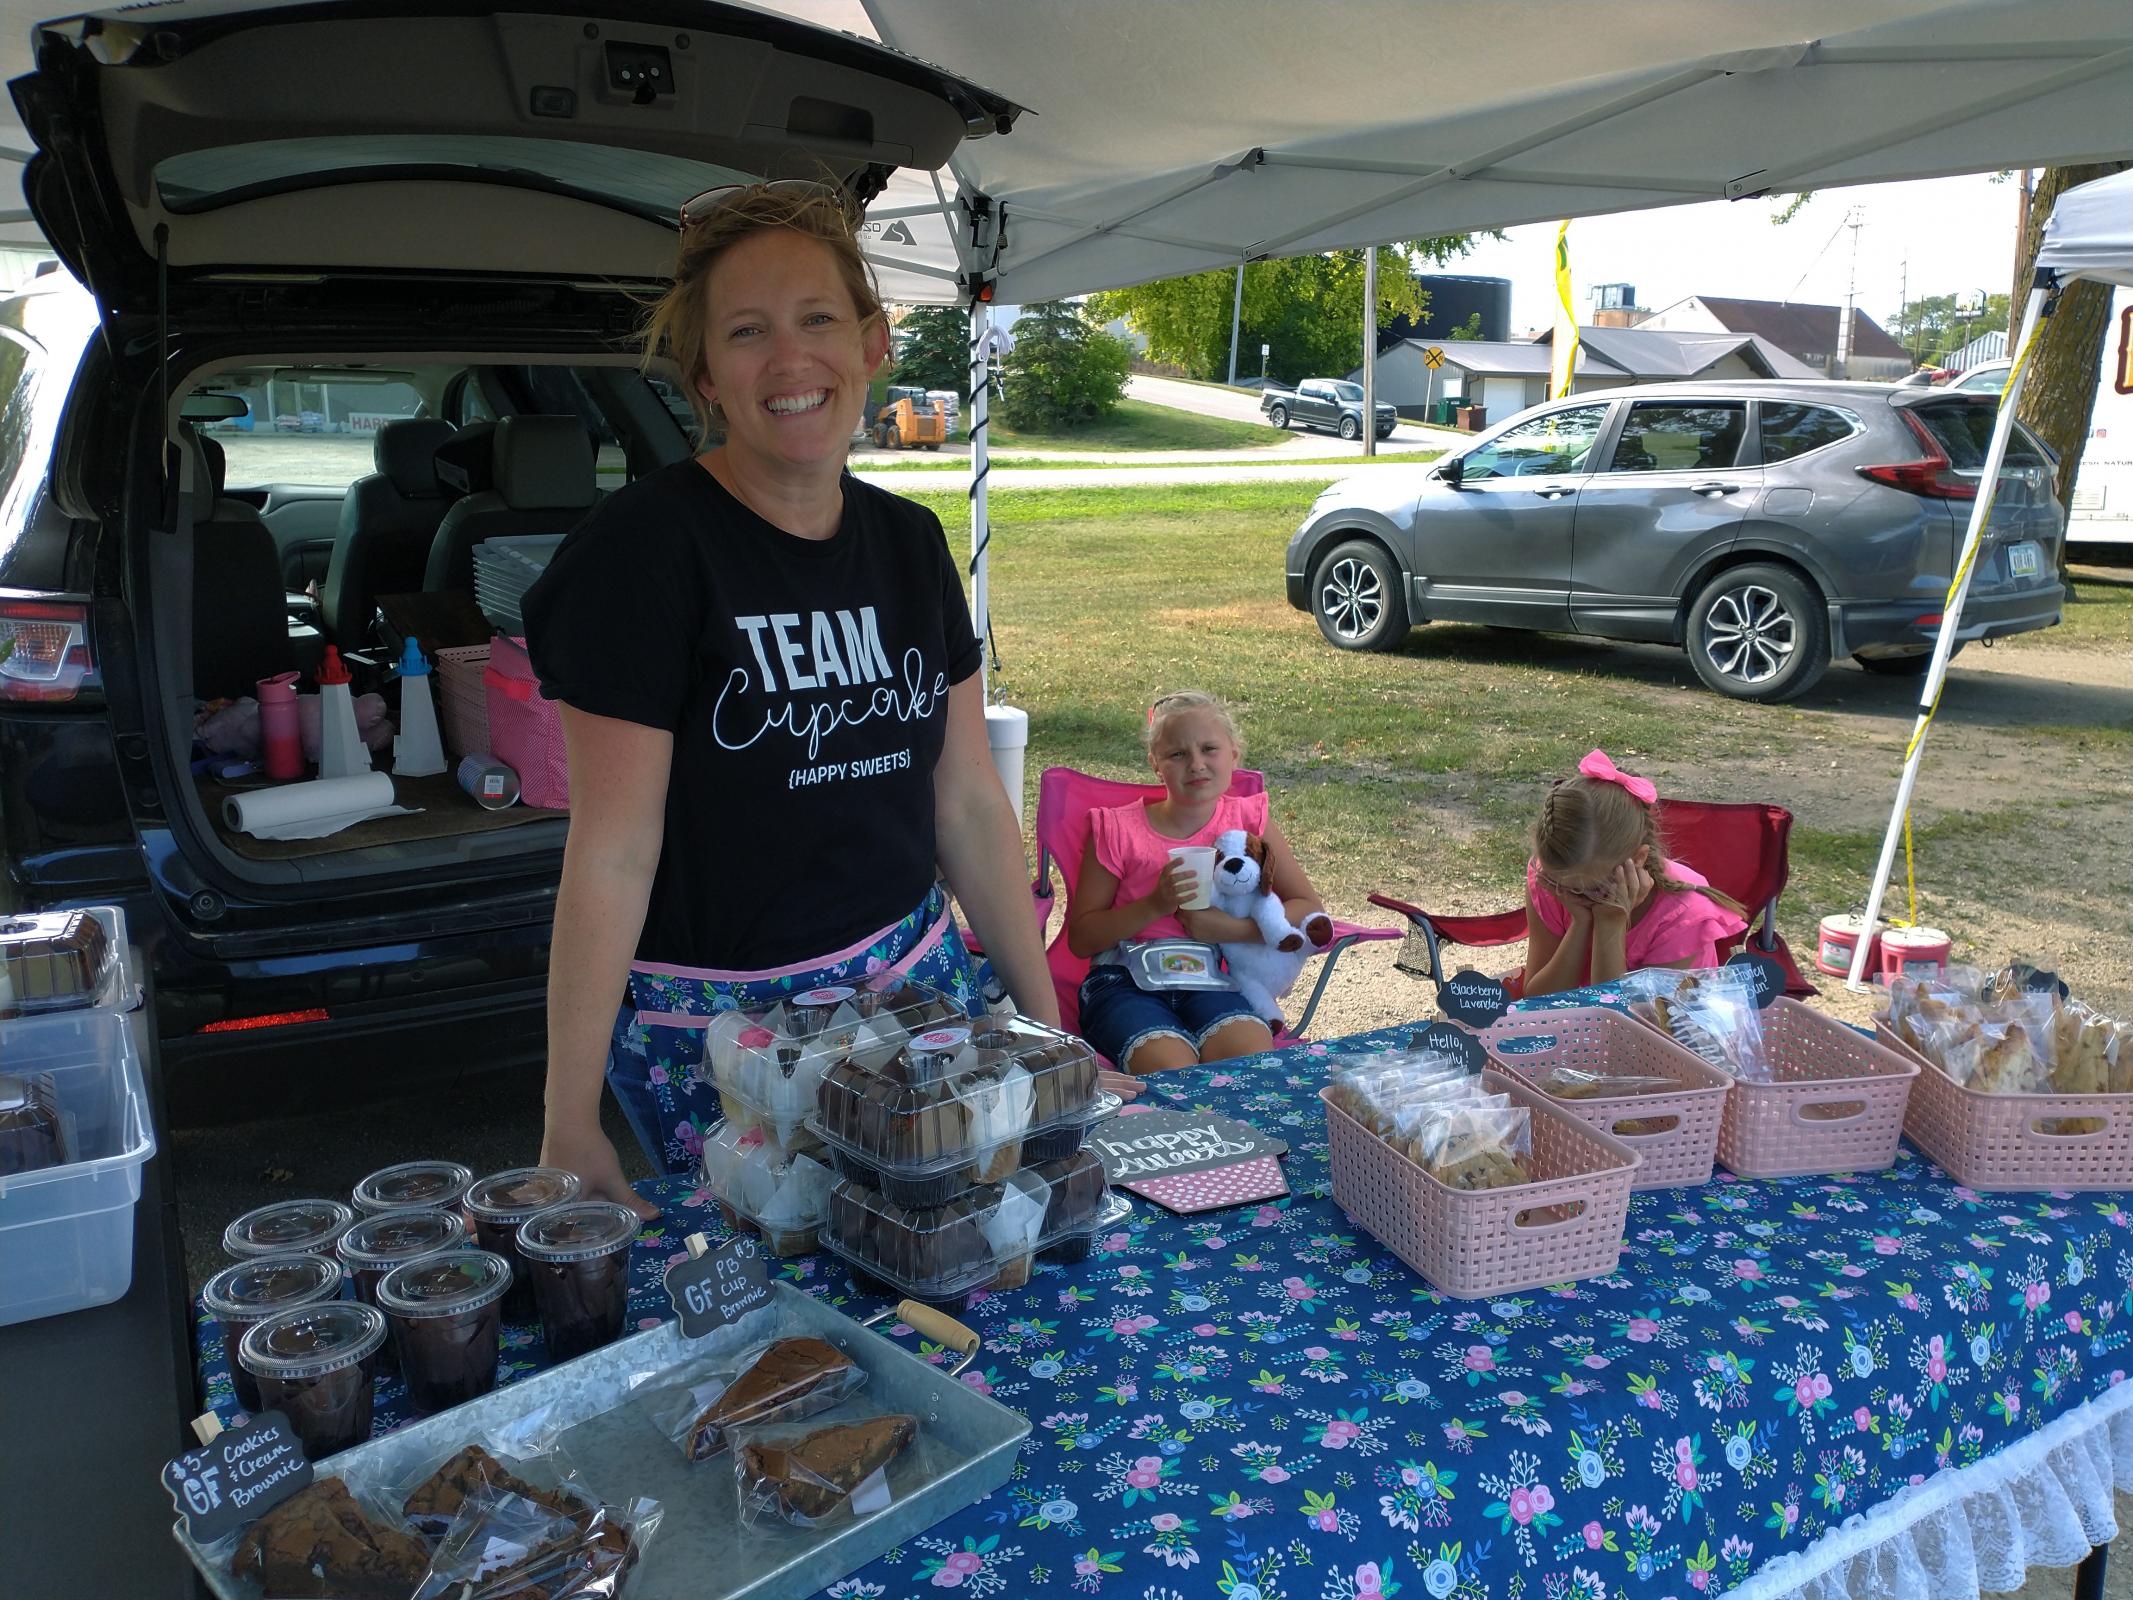 Forest City woman brings smiles to locals through at-home business Photo